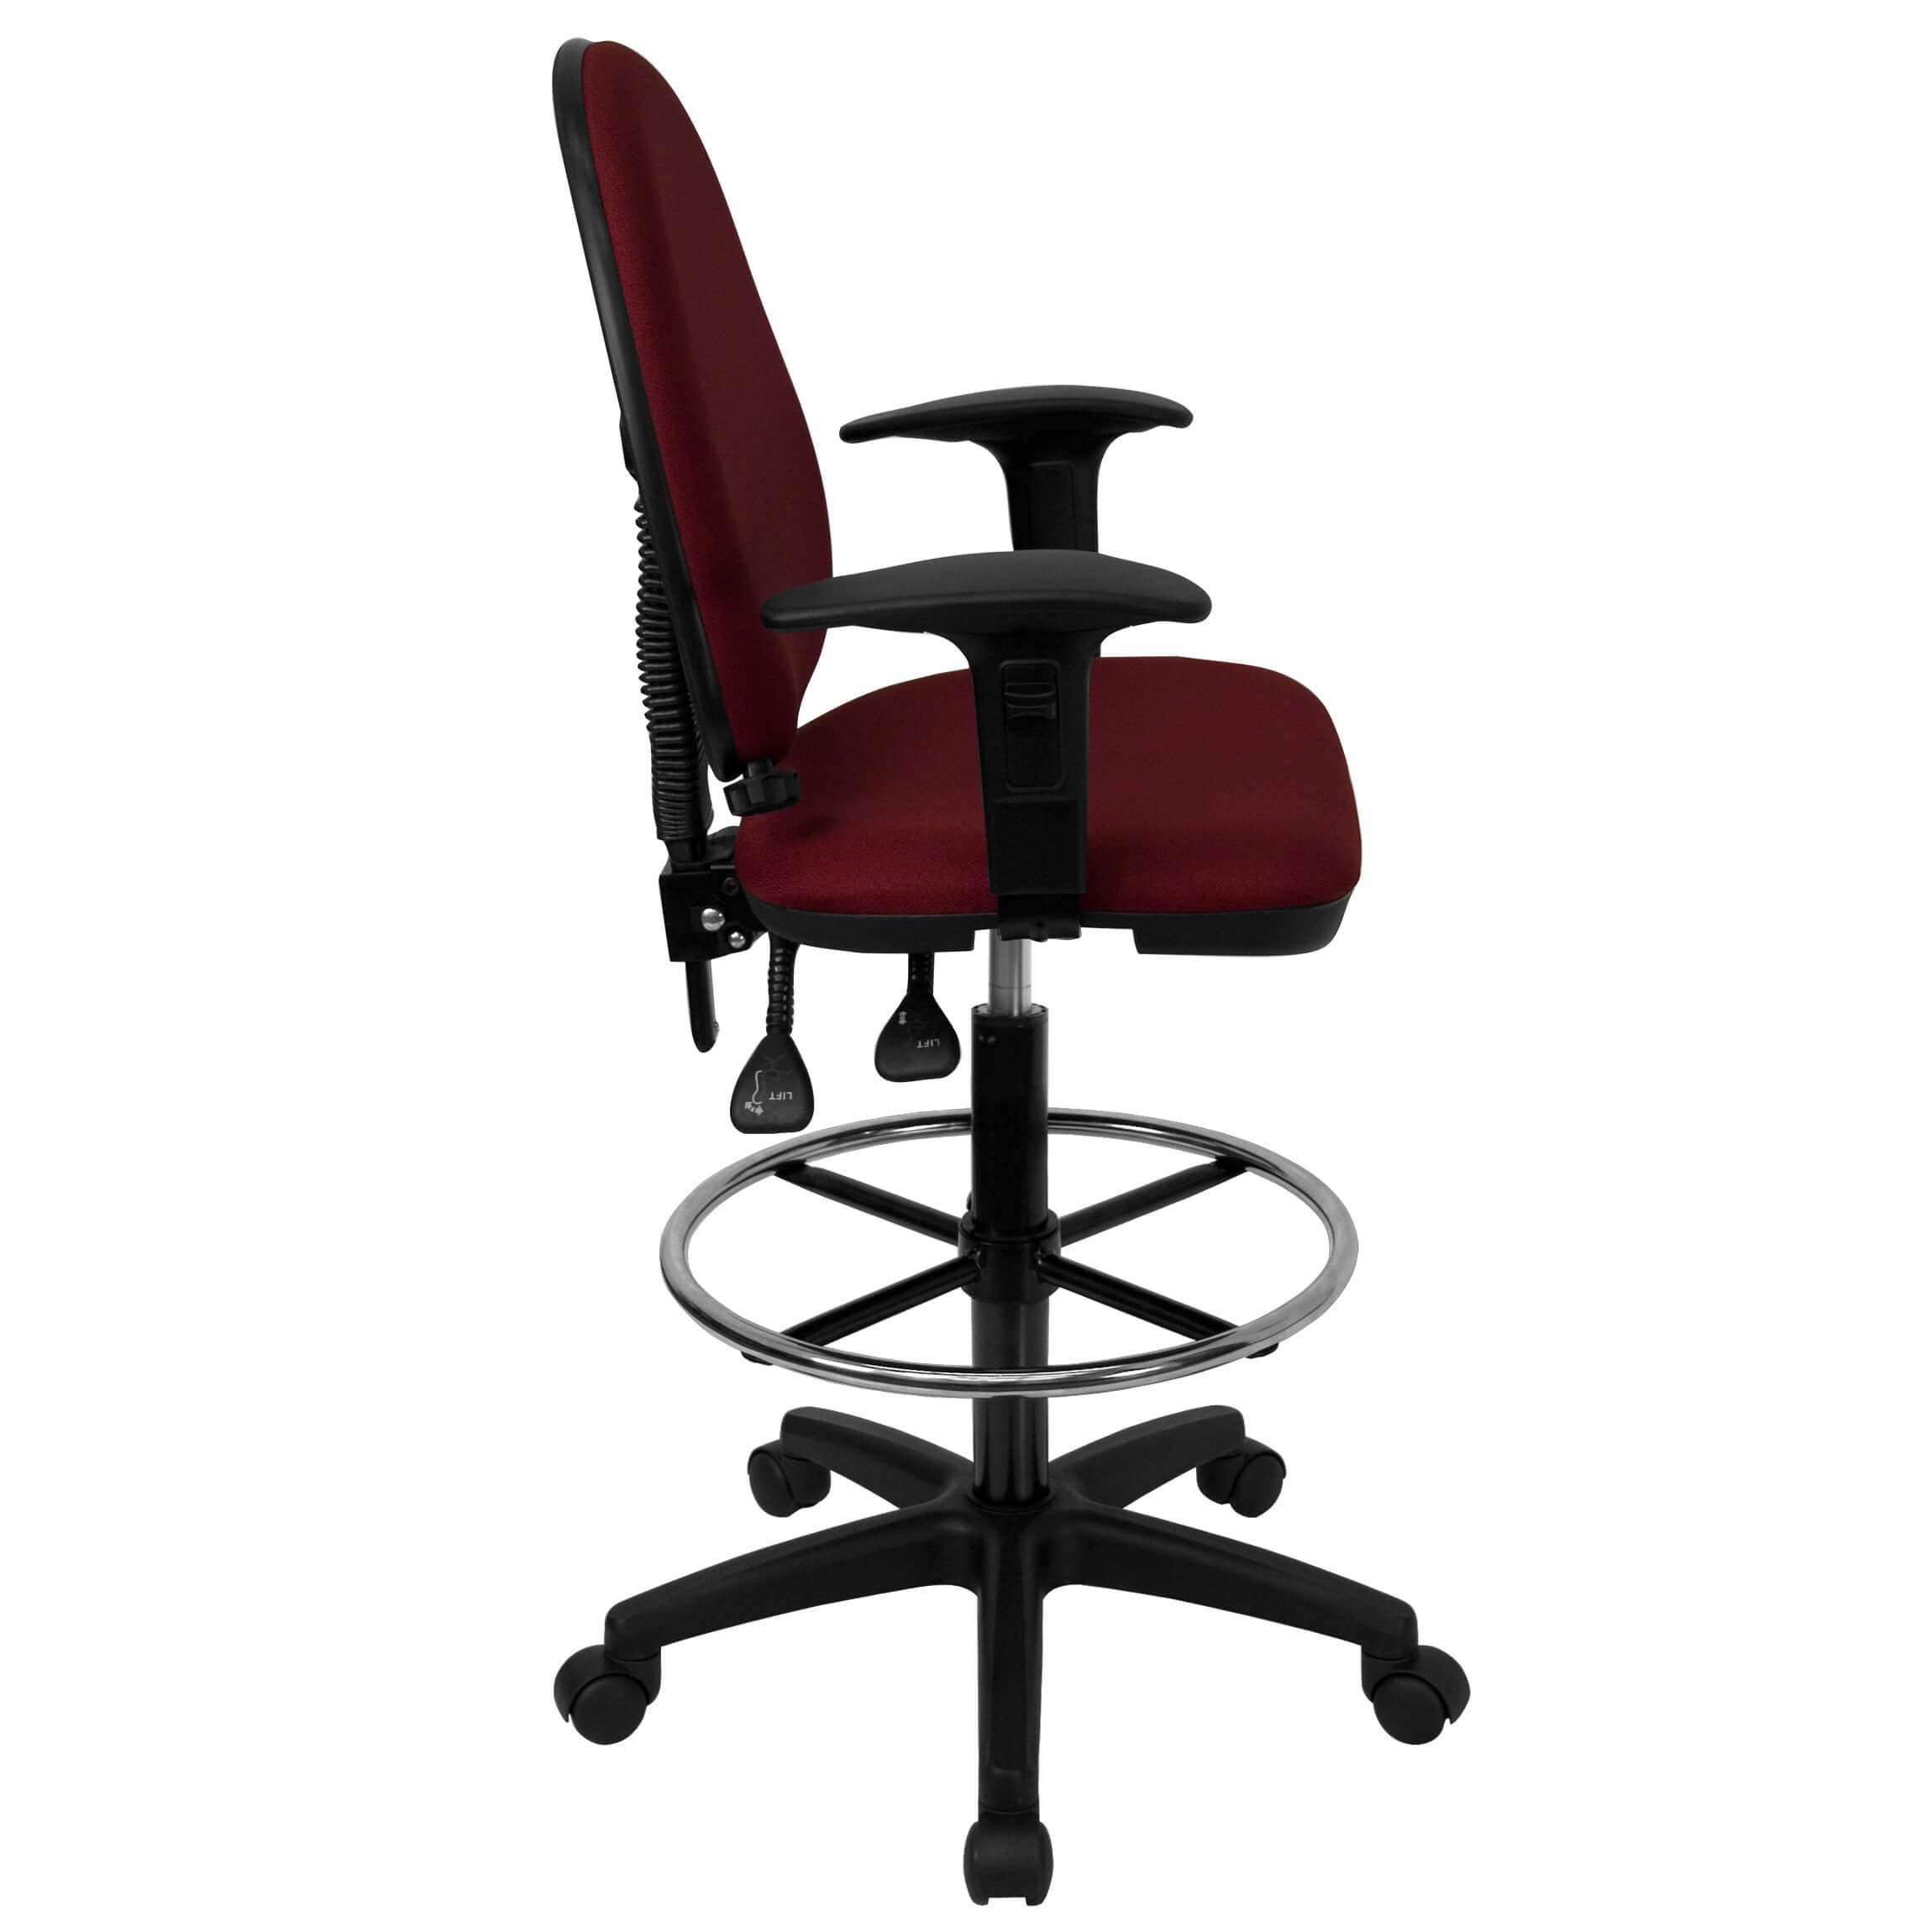 Adjustable drafting chair side view